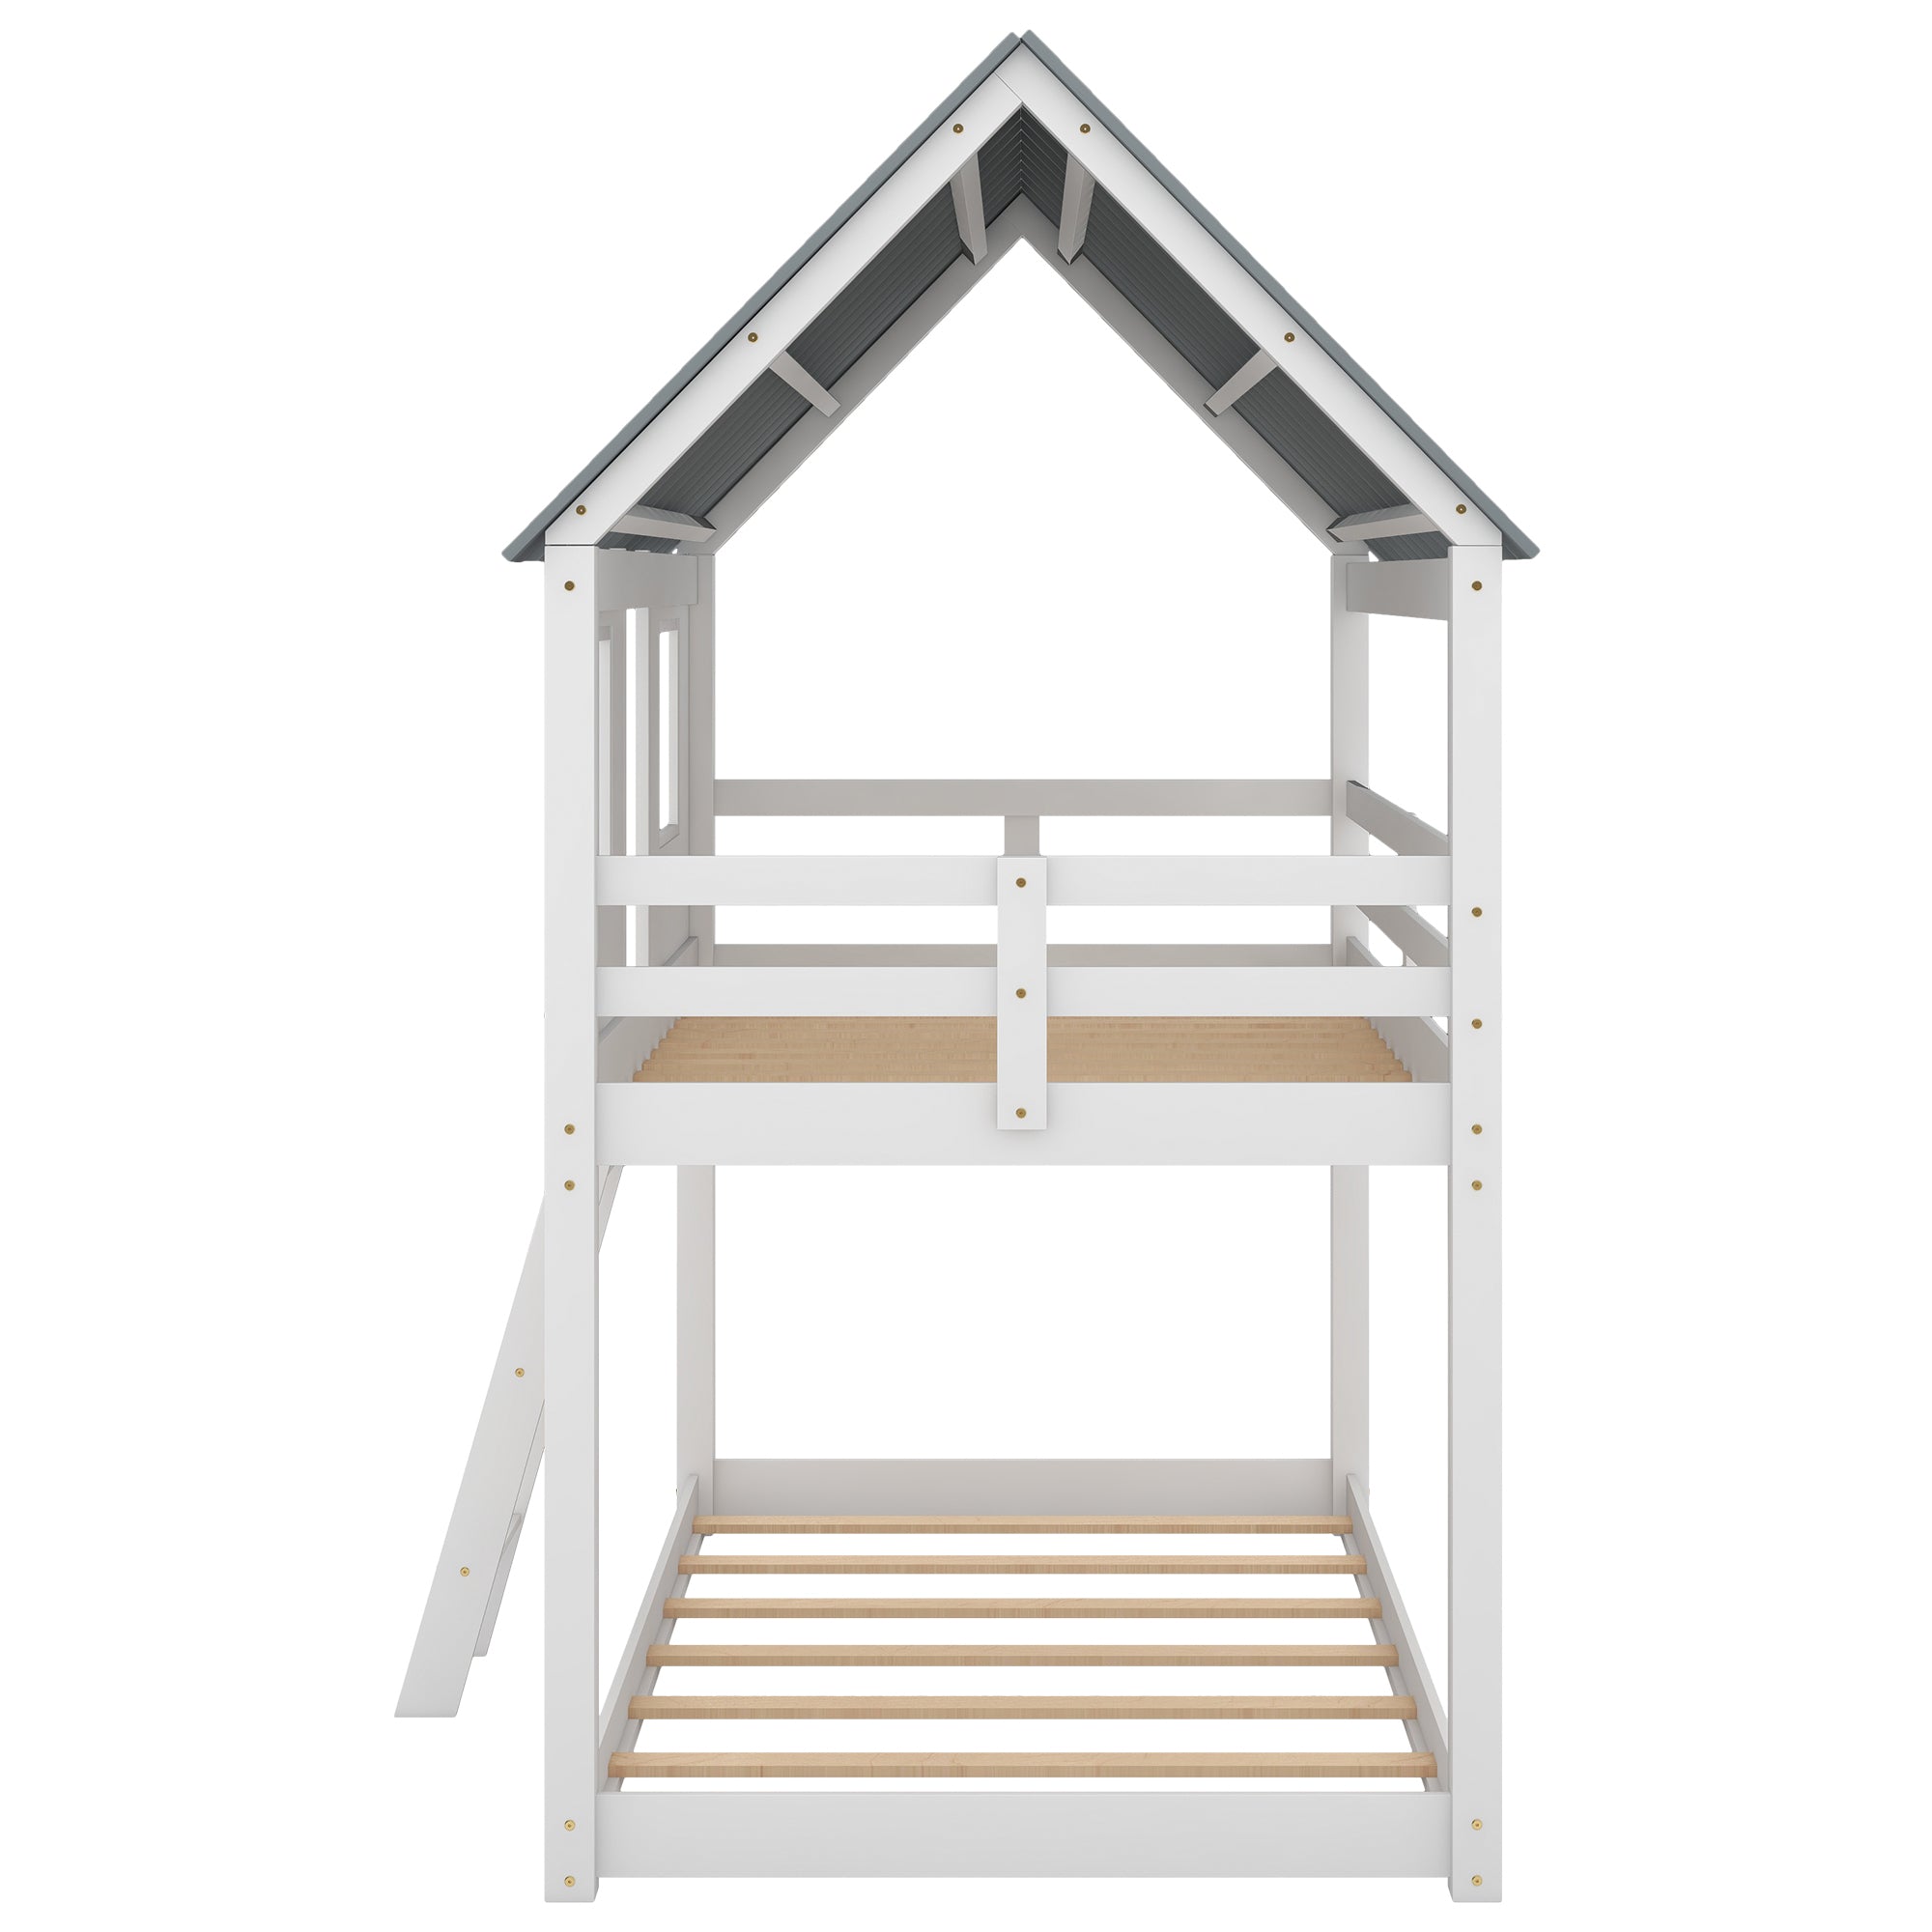 Ava White Wood Tree House Twin Bunk Beds